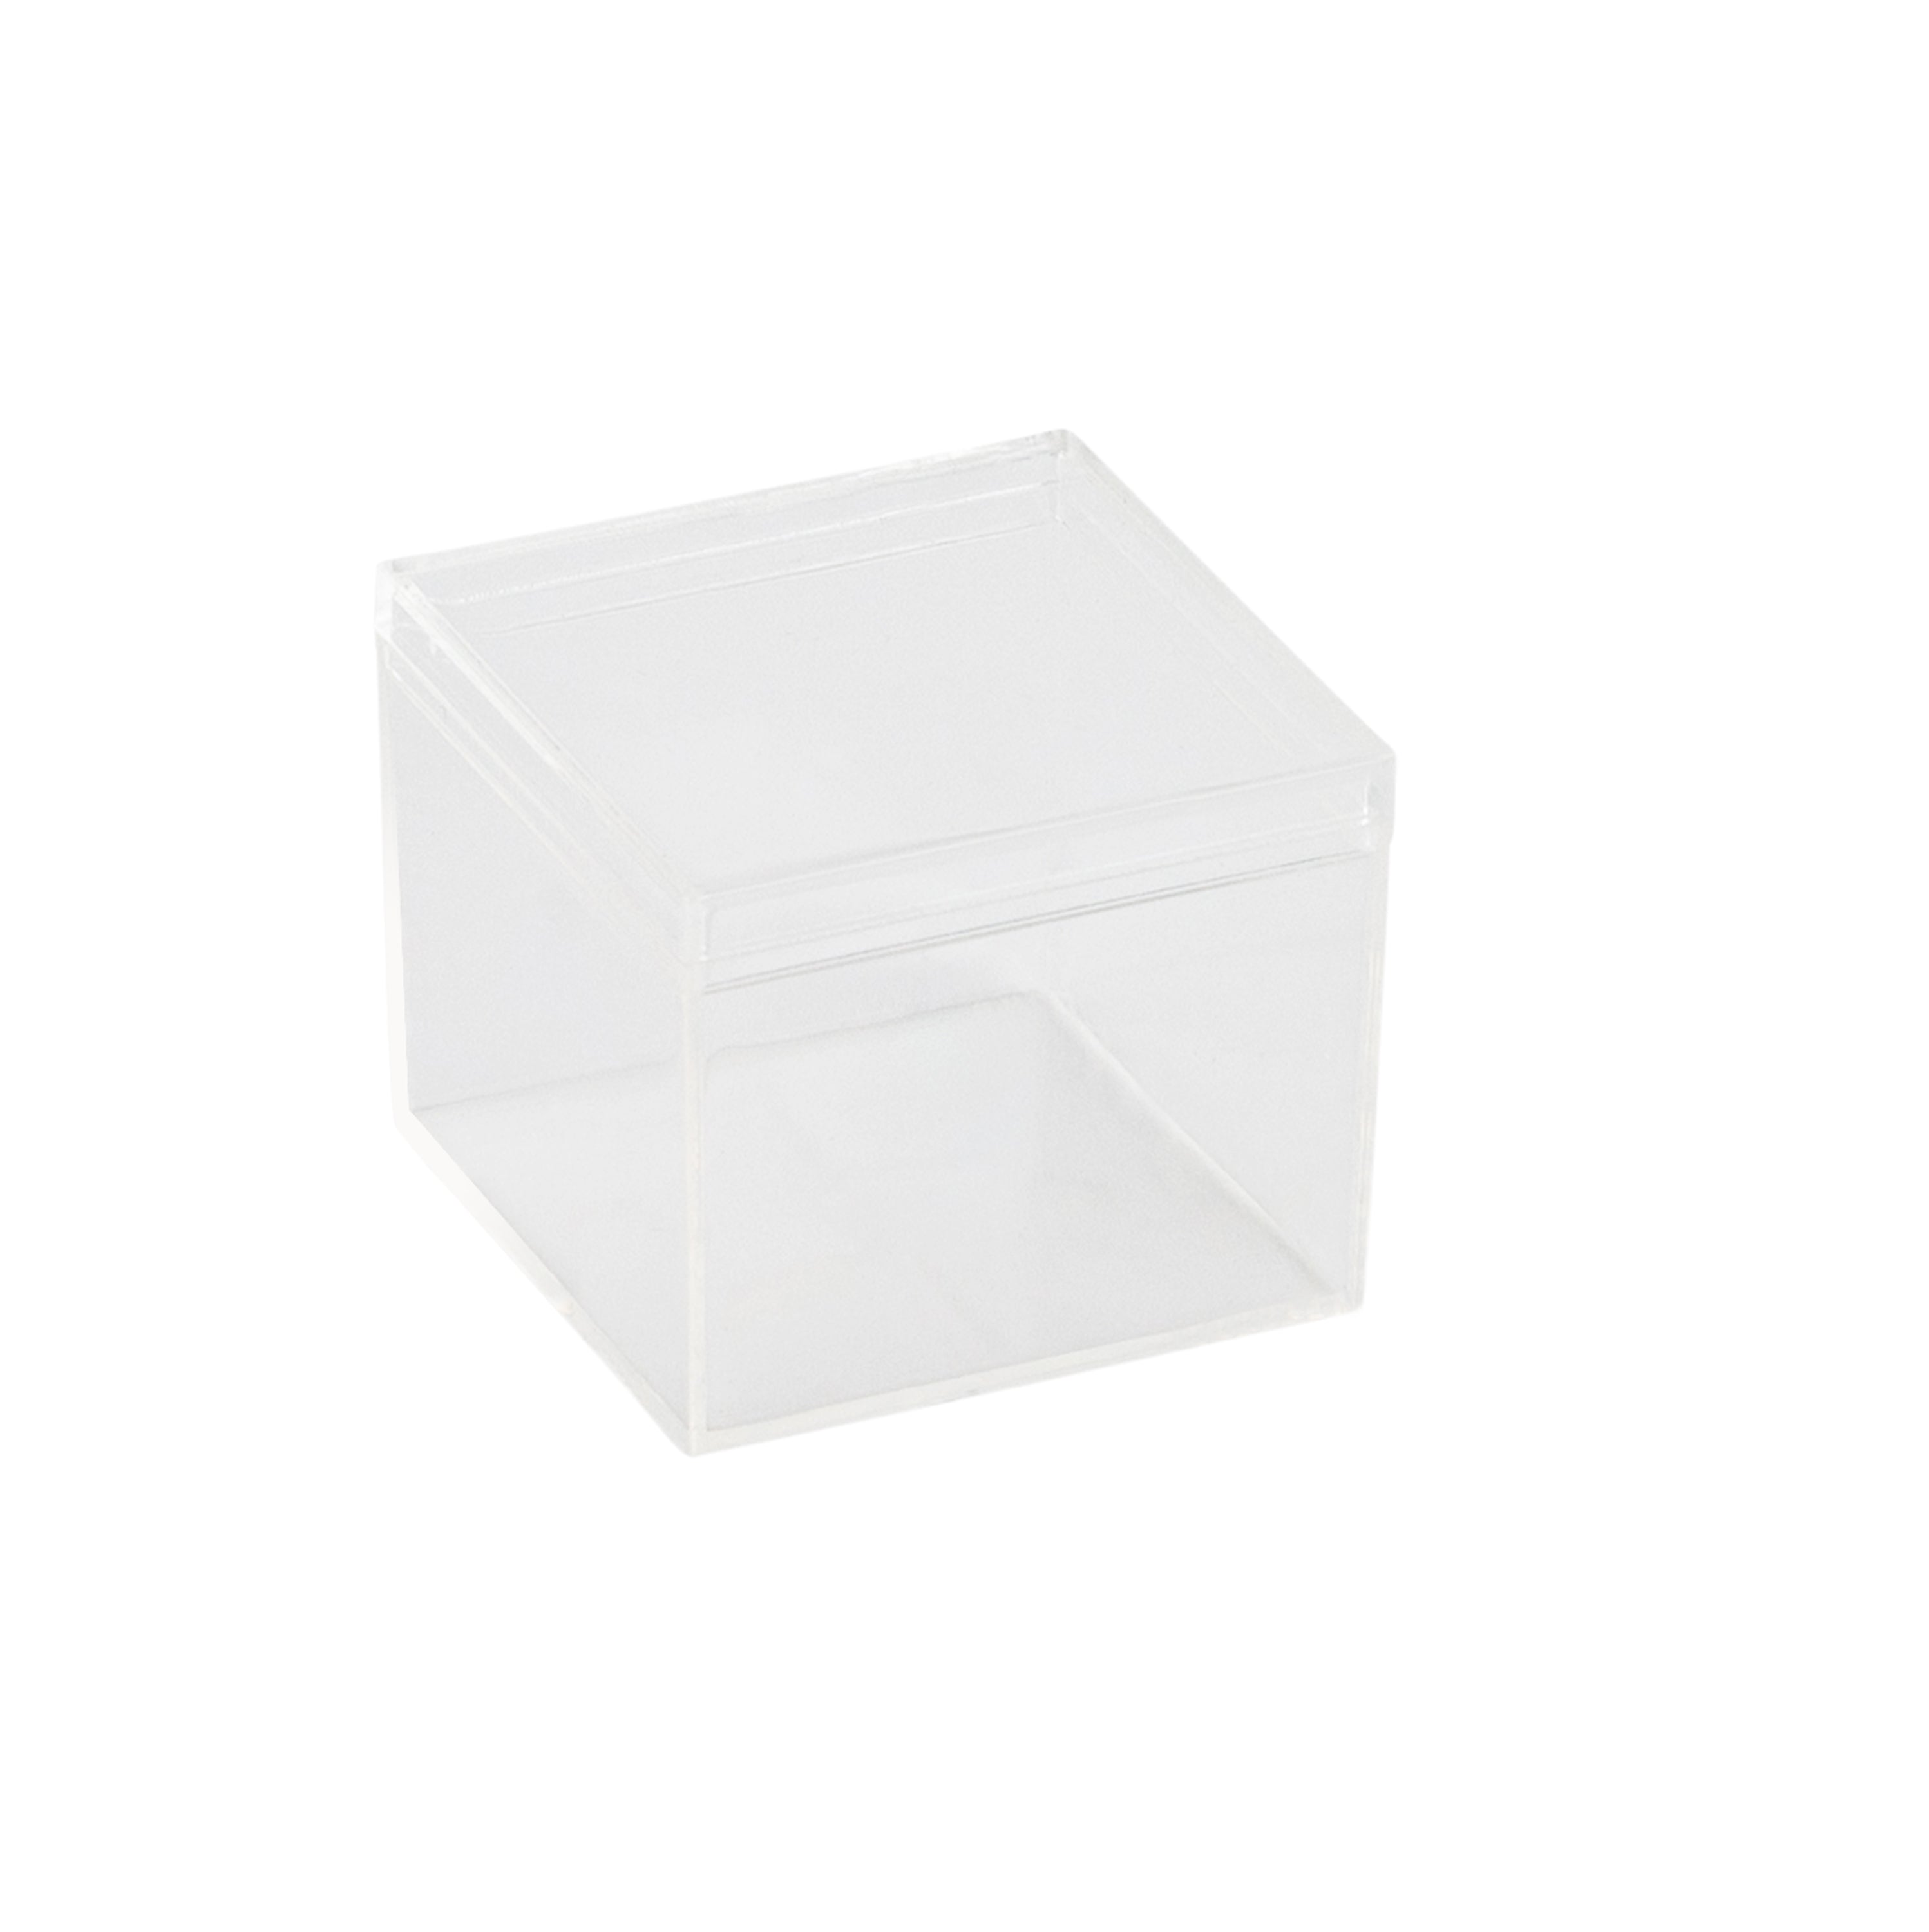 12 Pack Acrylic Square Cube, Small Clear Box With Lids,Simple